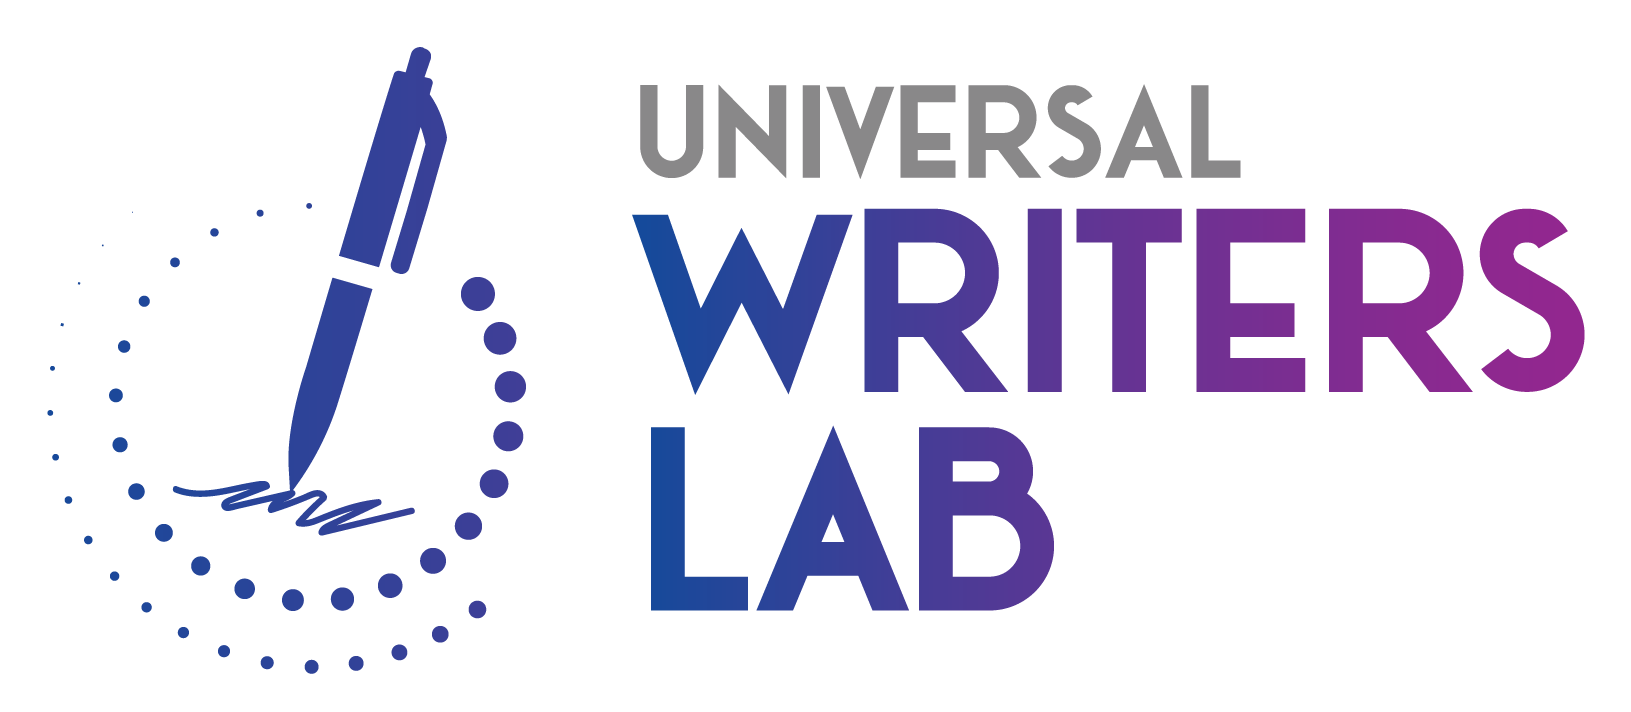 THE reimagined WRITERS LAB IS UP AND RUNNING